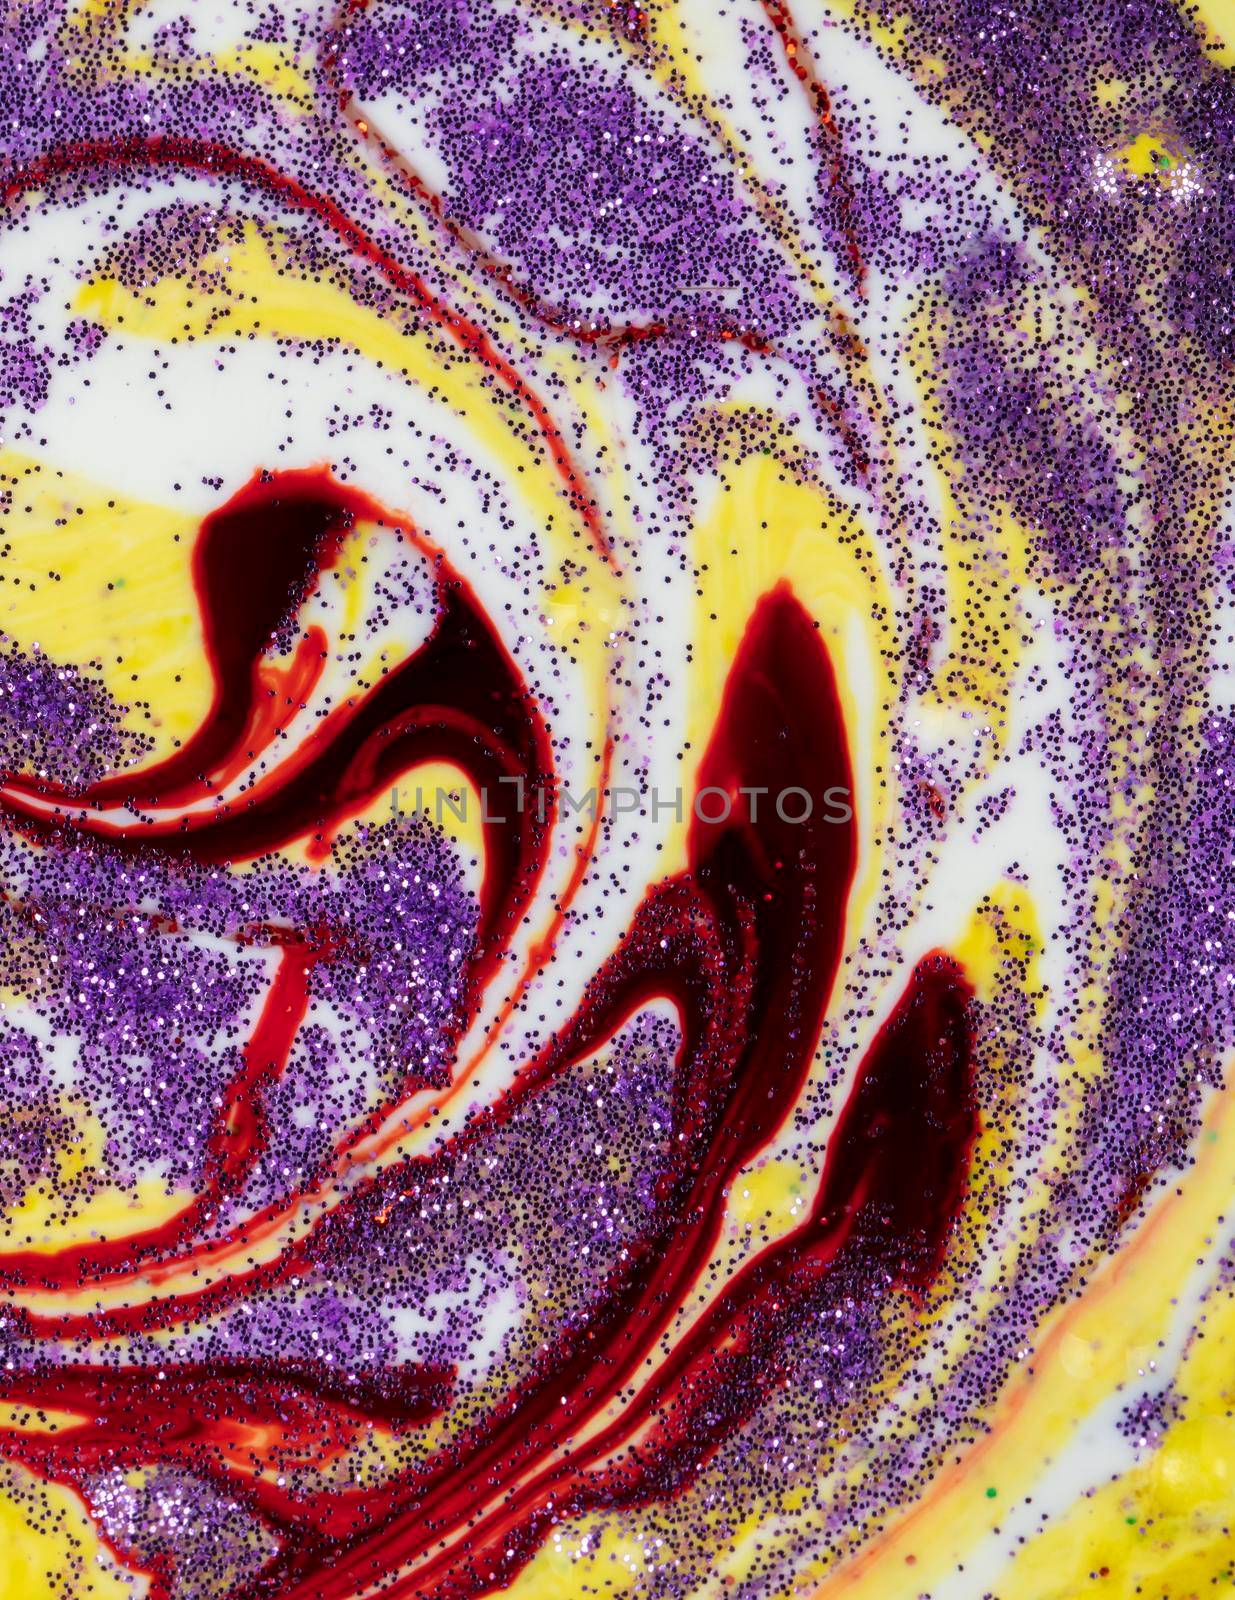 Yellow smeared in a circle with purple sparkles Abstract pattern with curls. Popular fashionable art design.